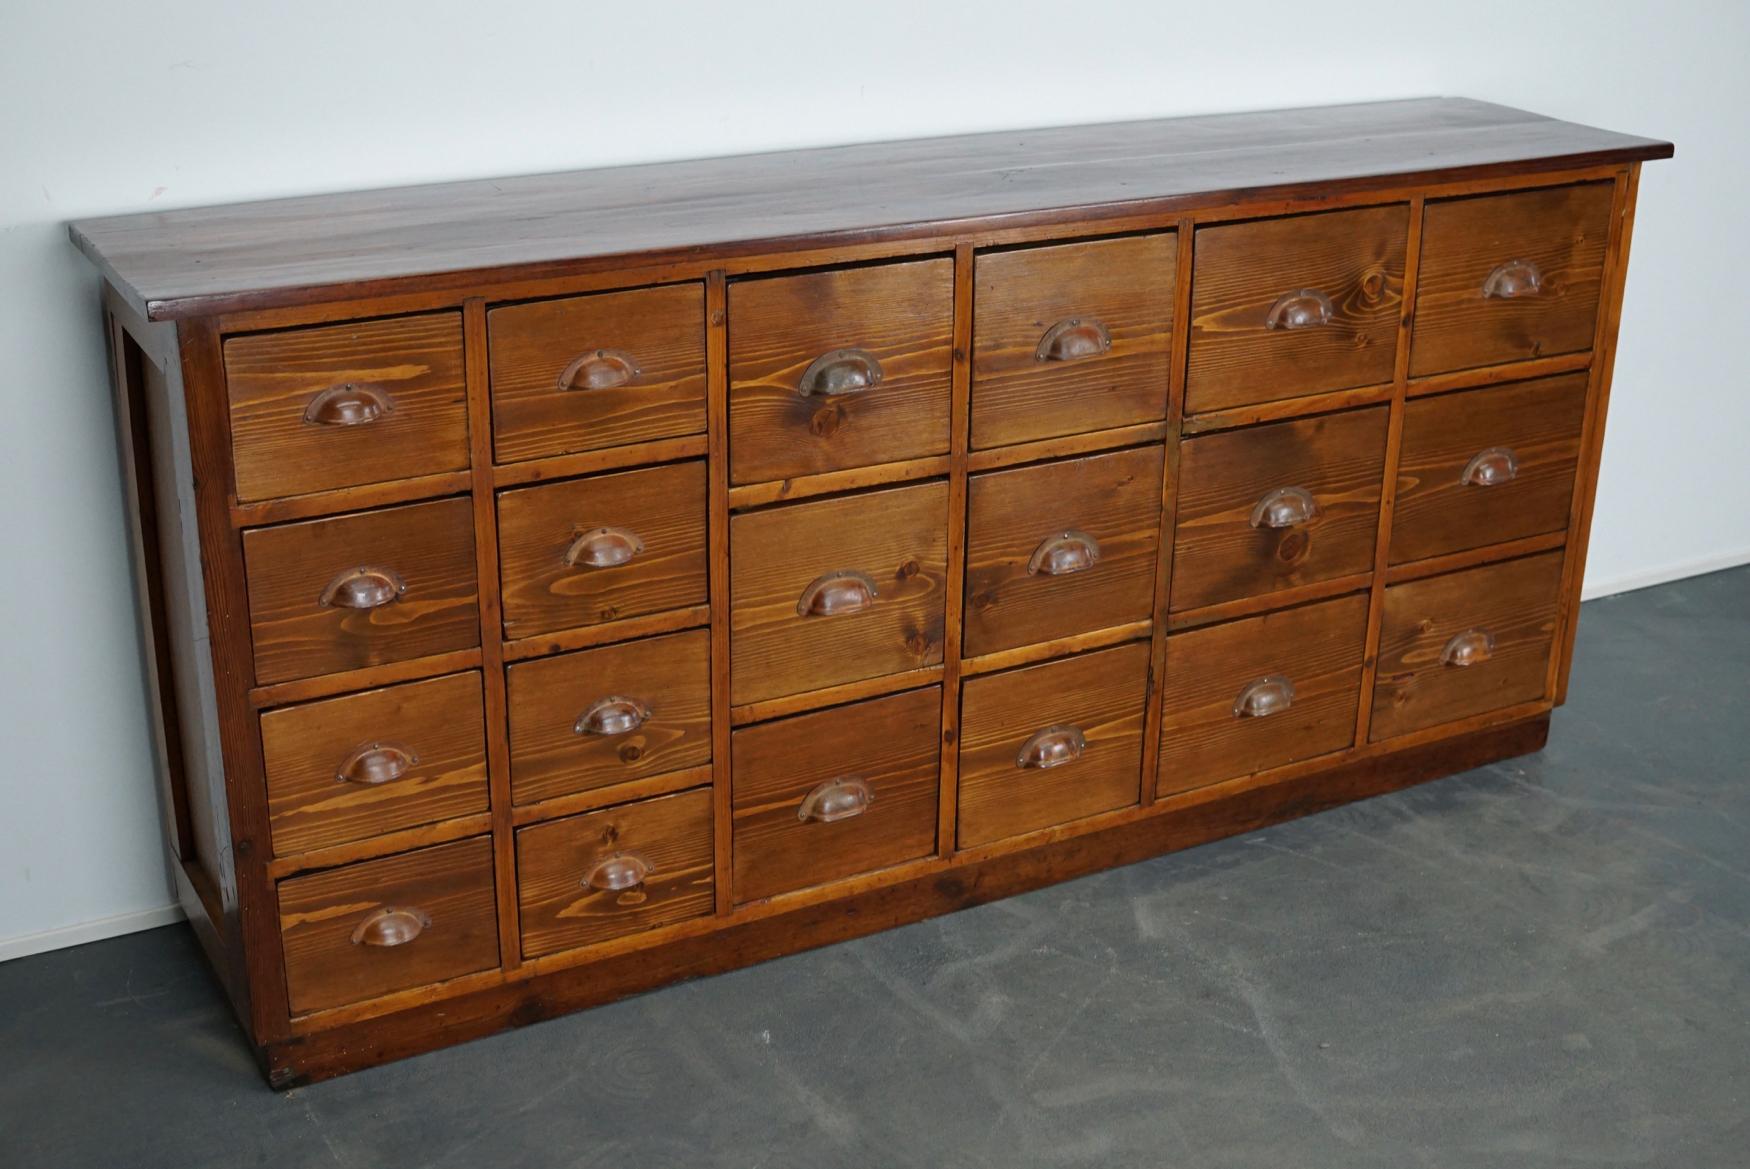 This apothecary cabinet was produced during the 1930s in Germany. This piece features 20 drawers. The interior dimensions of the drawers are: D x W x H 28 x 18.5 x 13.5 and 28 x 22 x 19 cm.